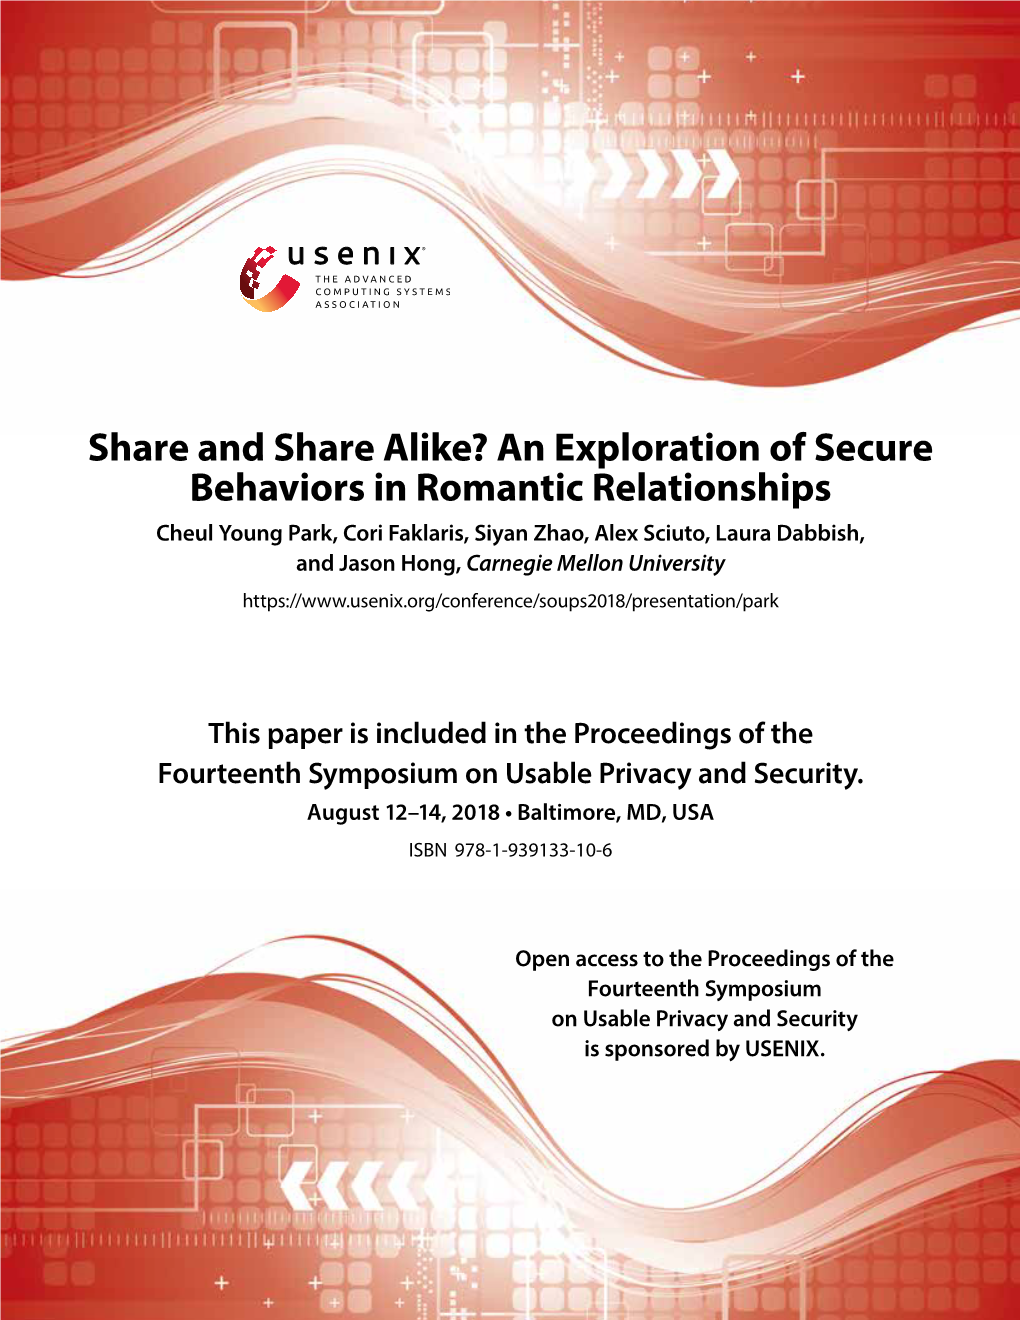 An Exploration of Secure Behaviors in Romantic Relationships